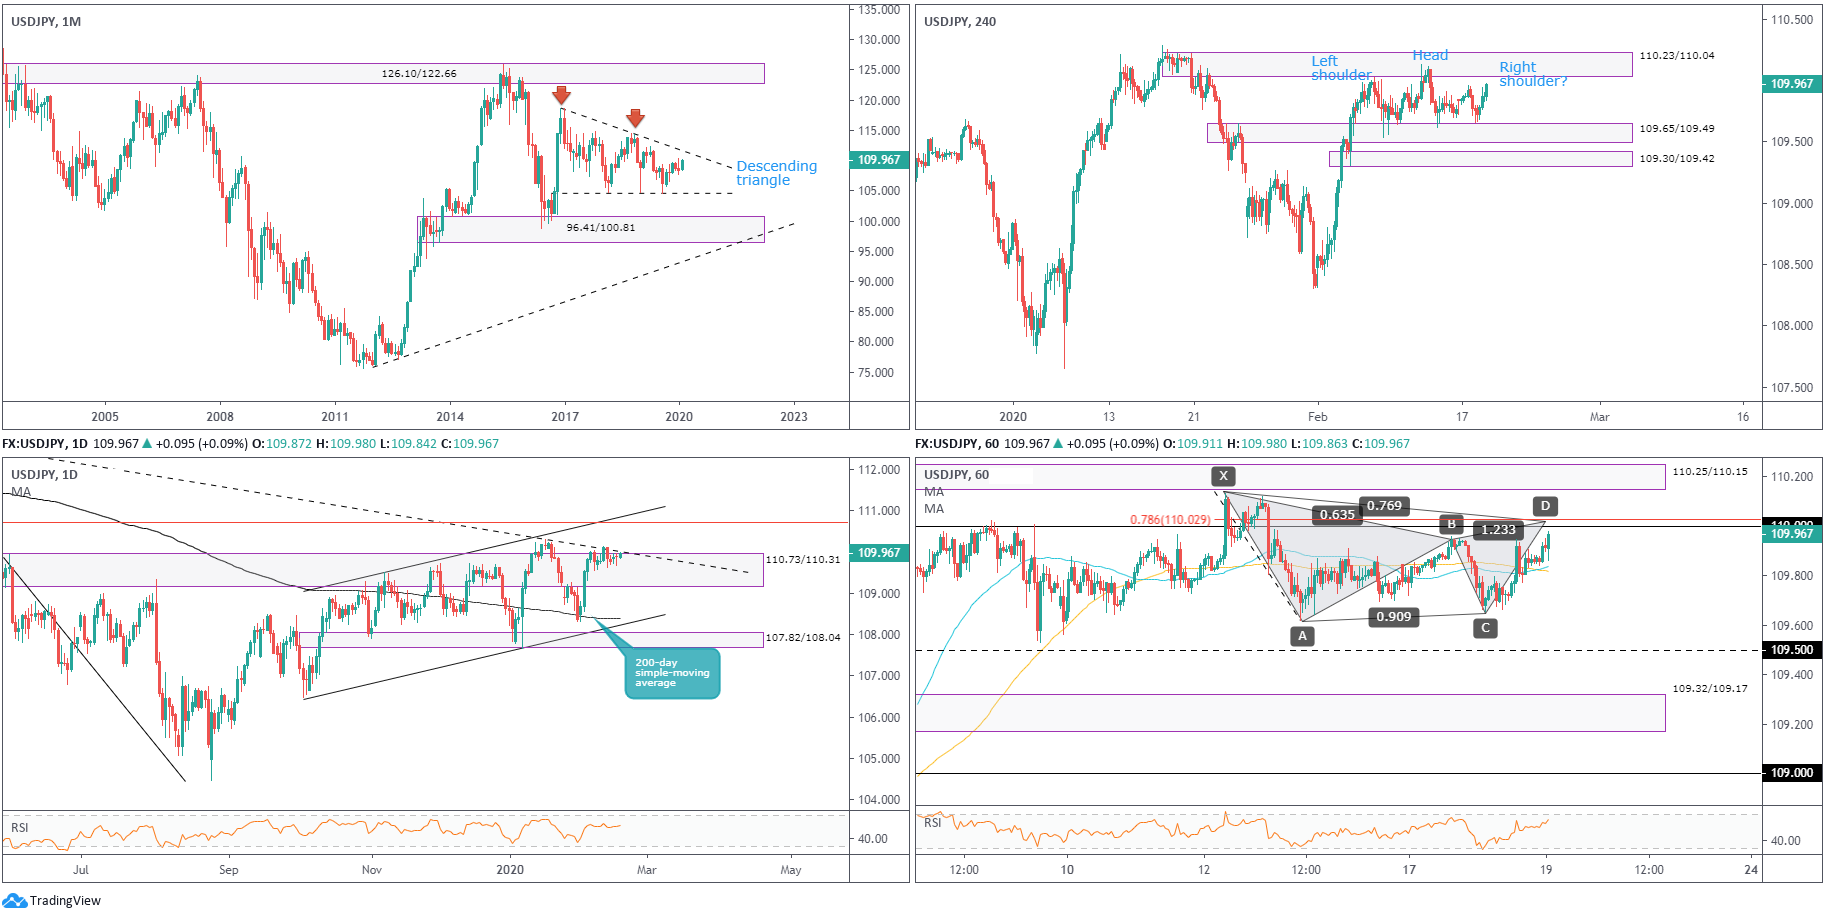 February 19th 2020: FOMC Eyed as Dollar Index Marches North., FP Markets